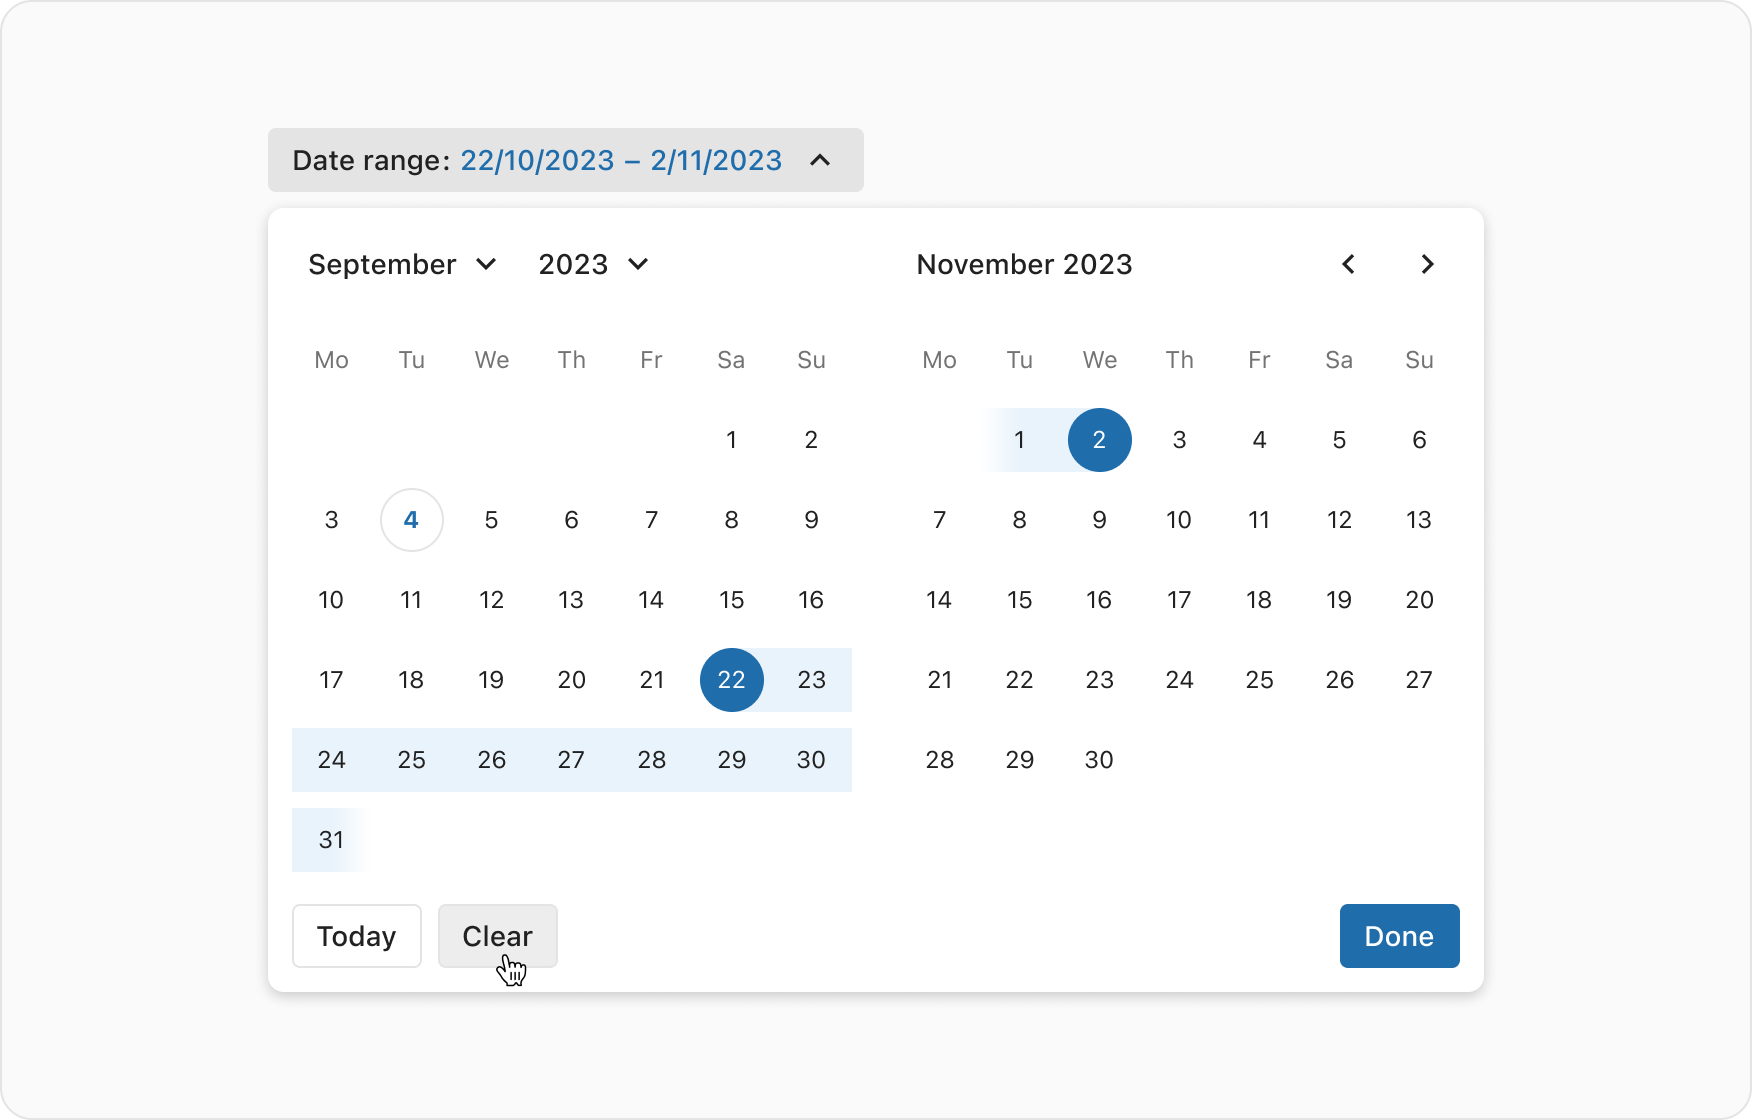 A UI example showing a date dropdown with selected start date of 22/10/2023 and selected end date of 02/11/2023